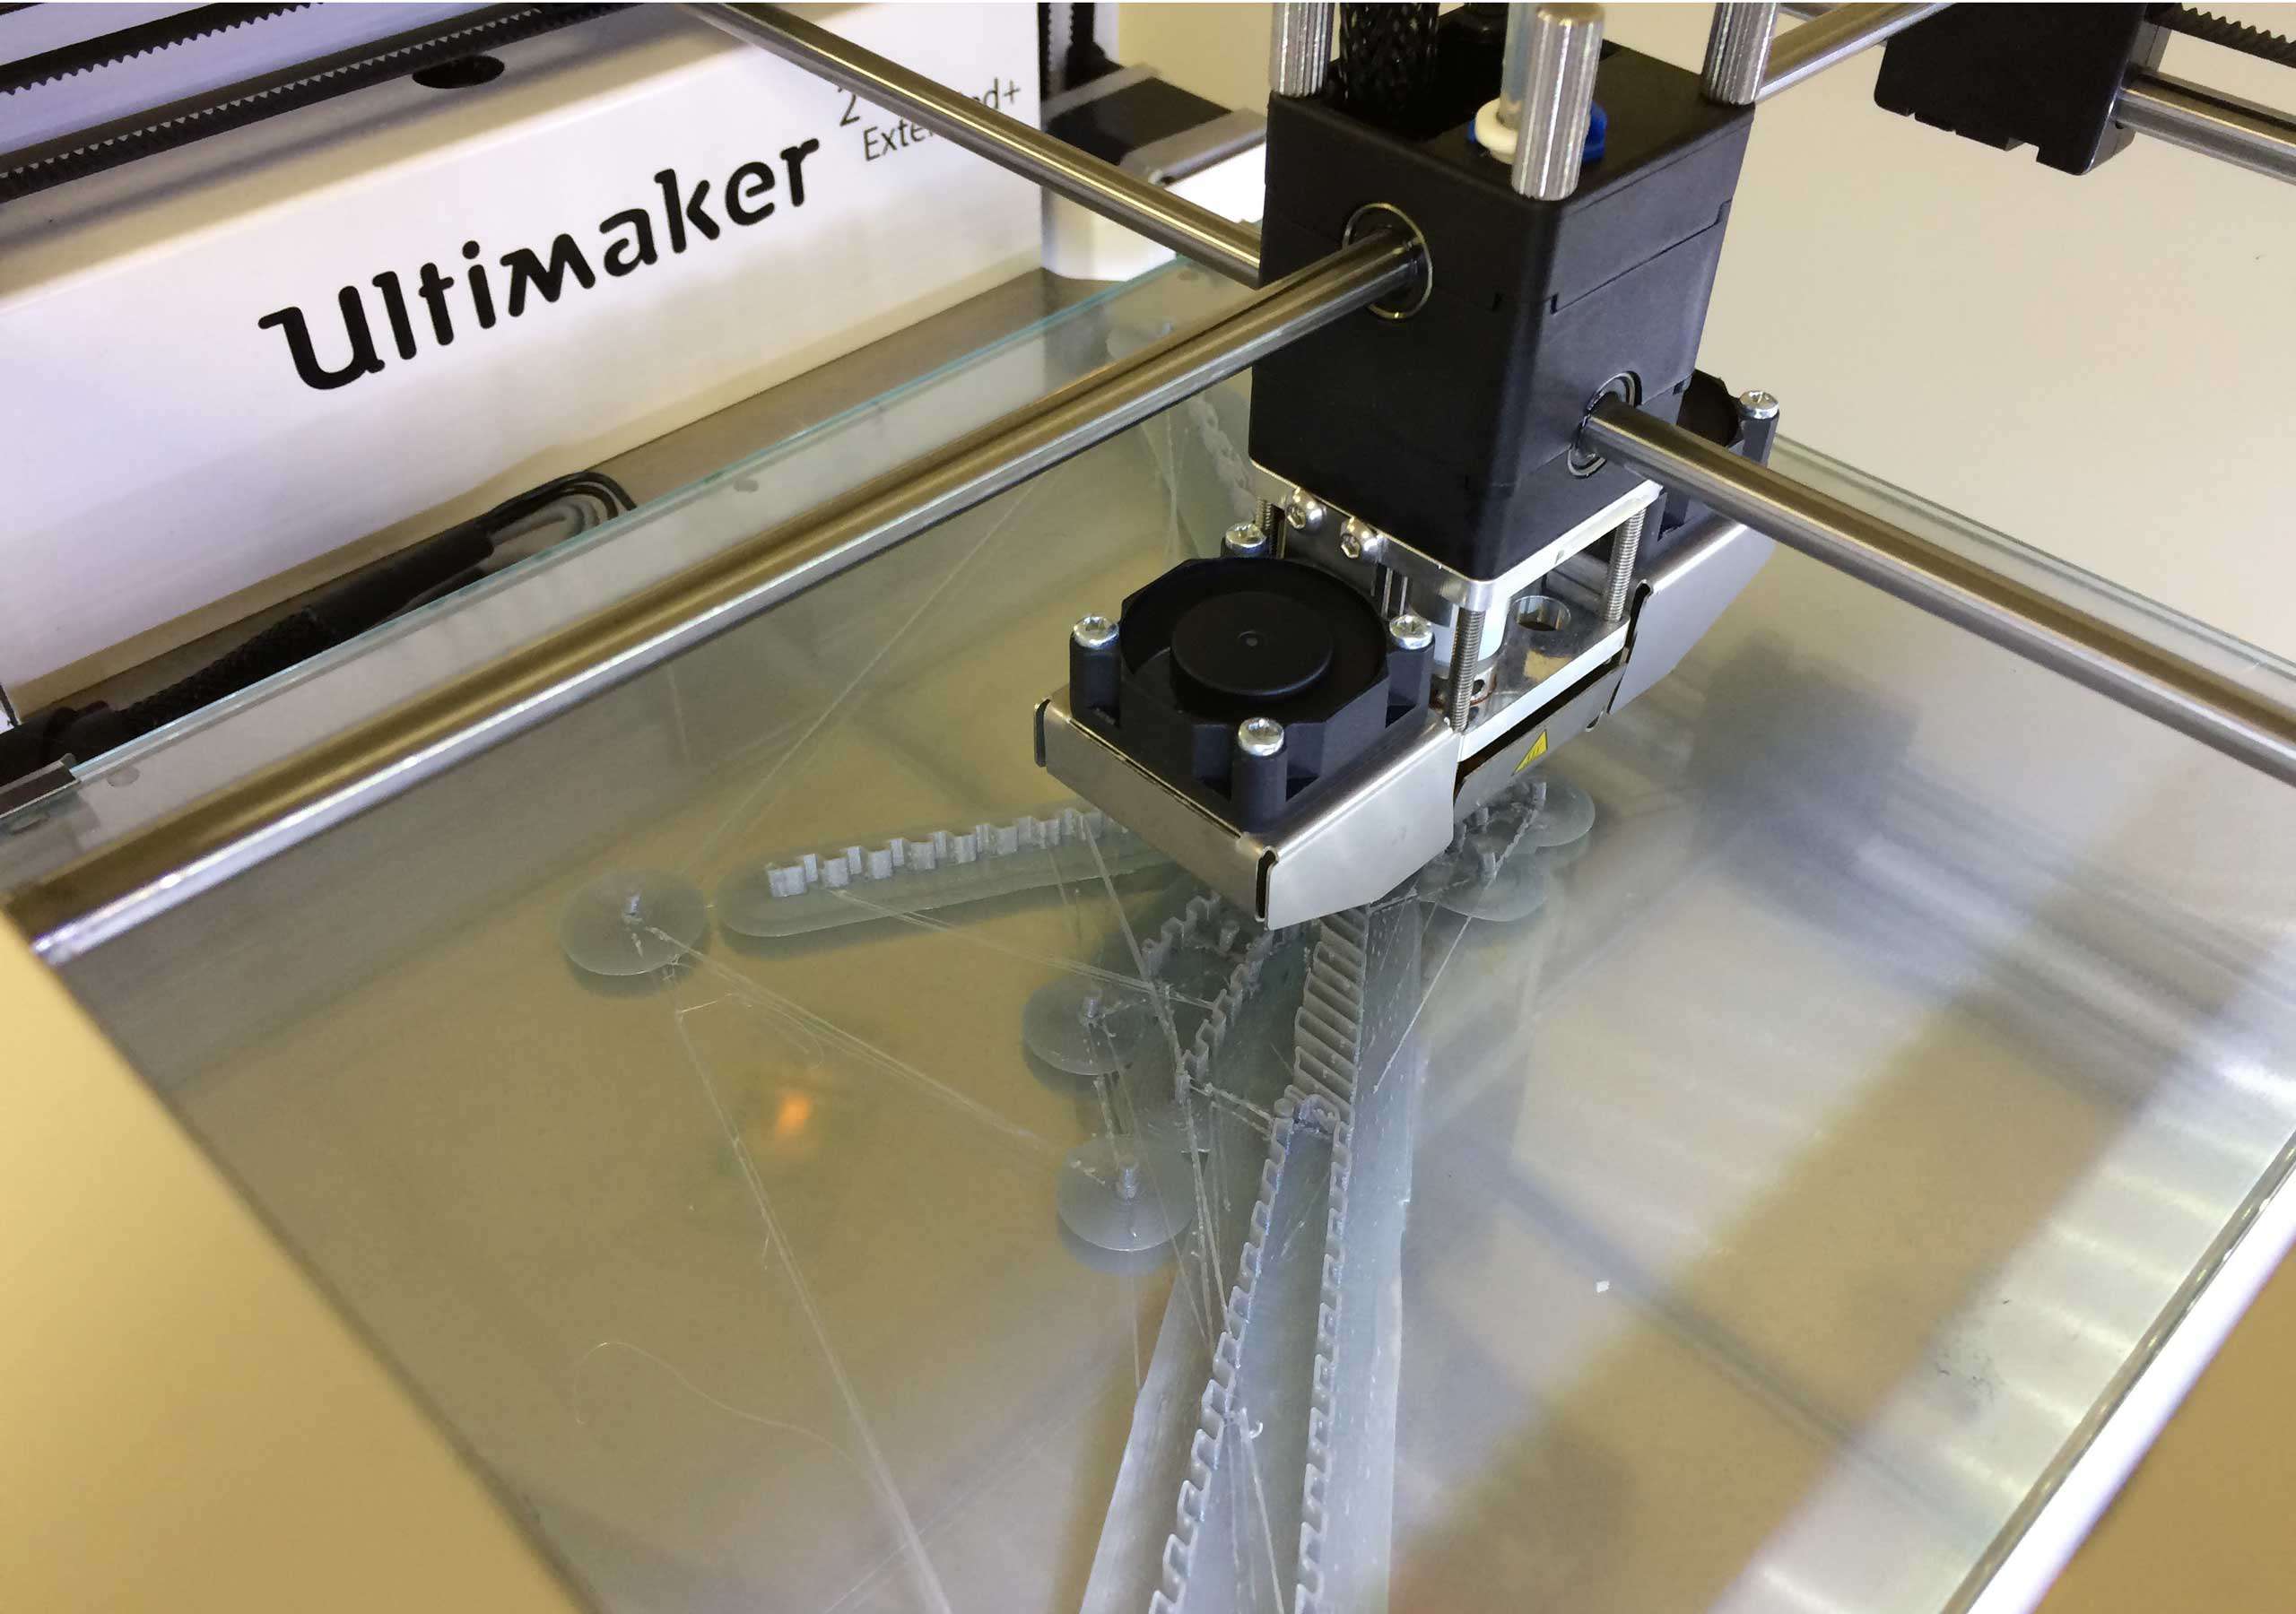 Developing a strategy for the future of 3D printing